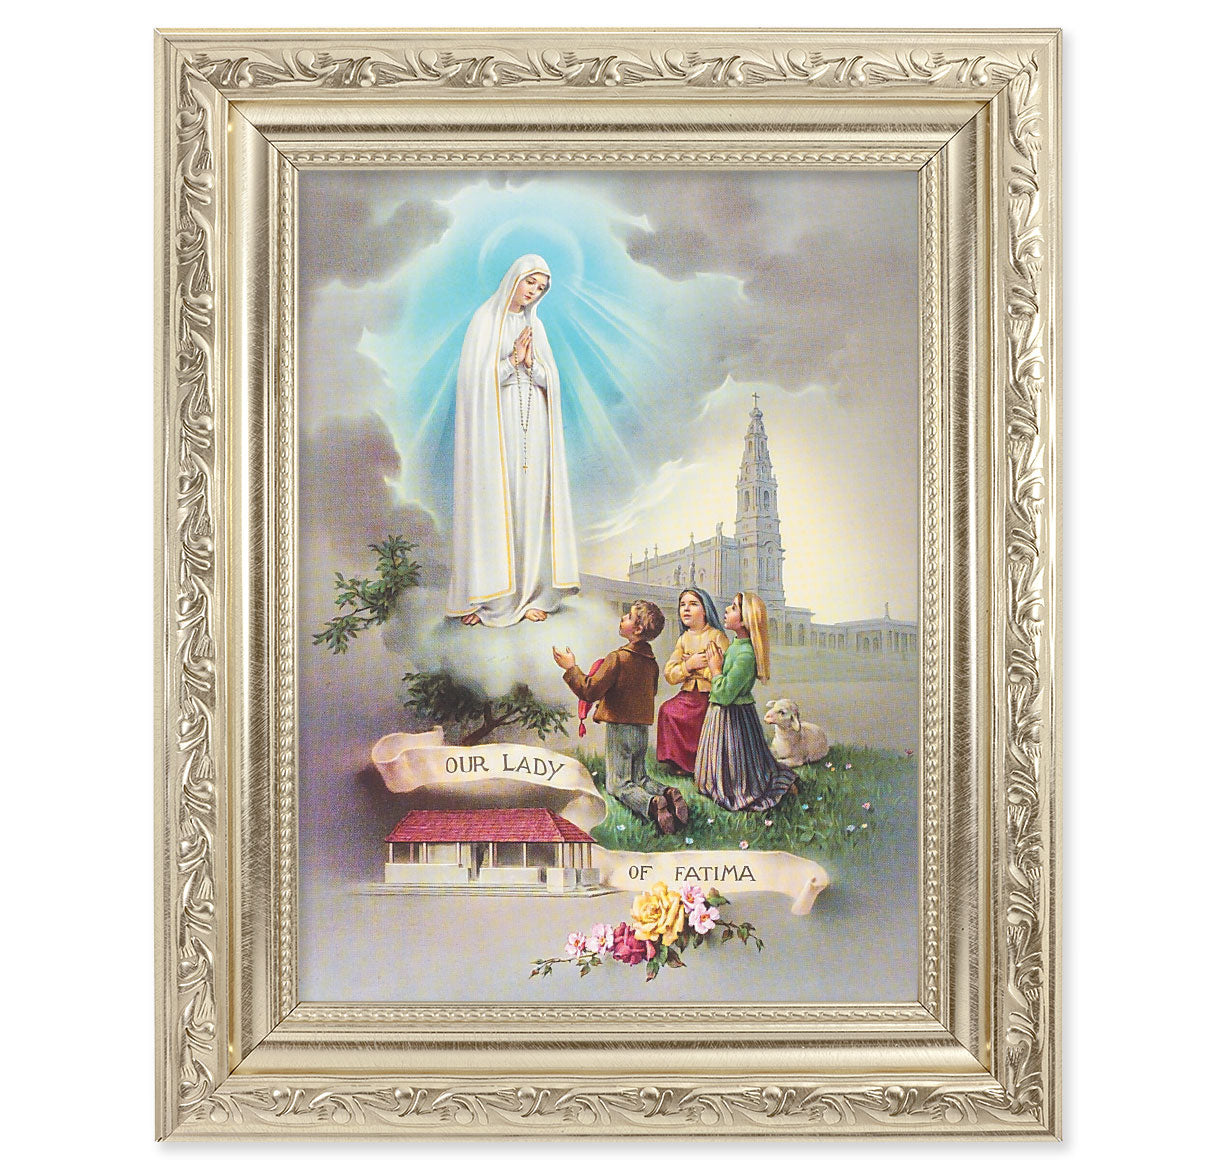 Our Lady of Fatima Silver Framed Art